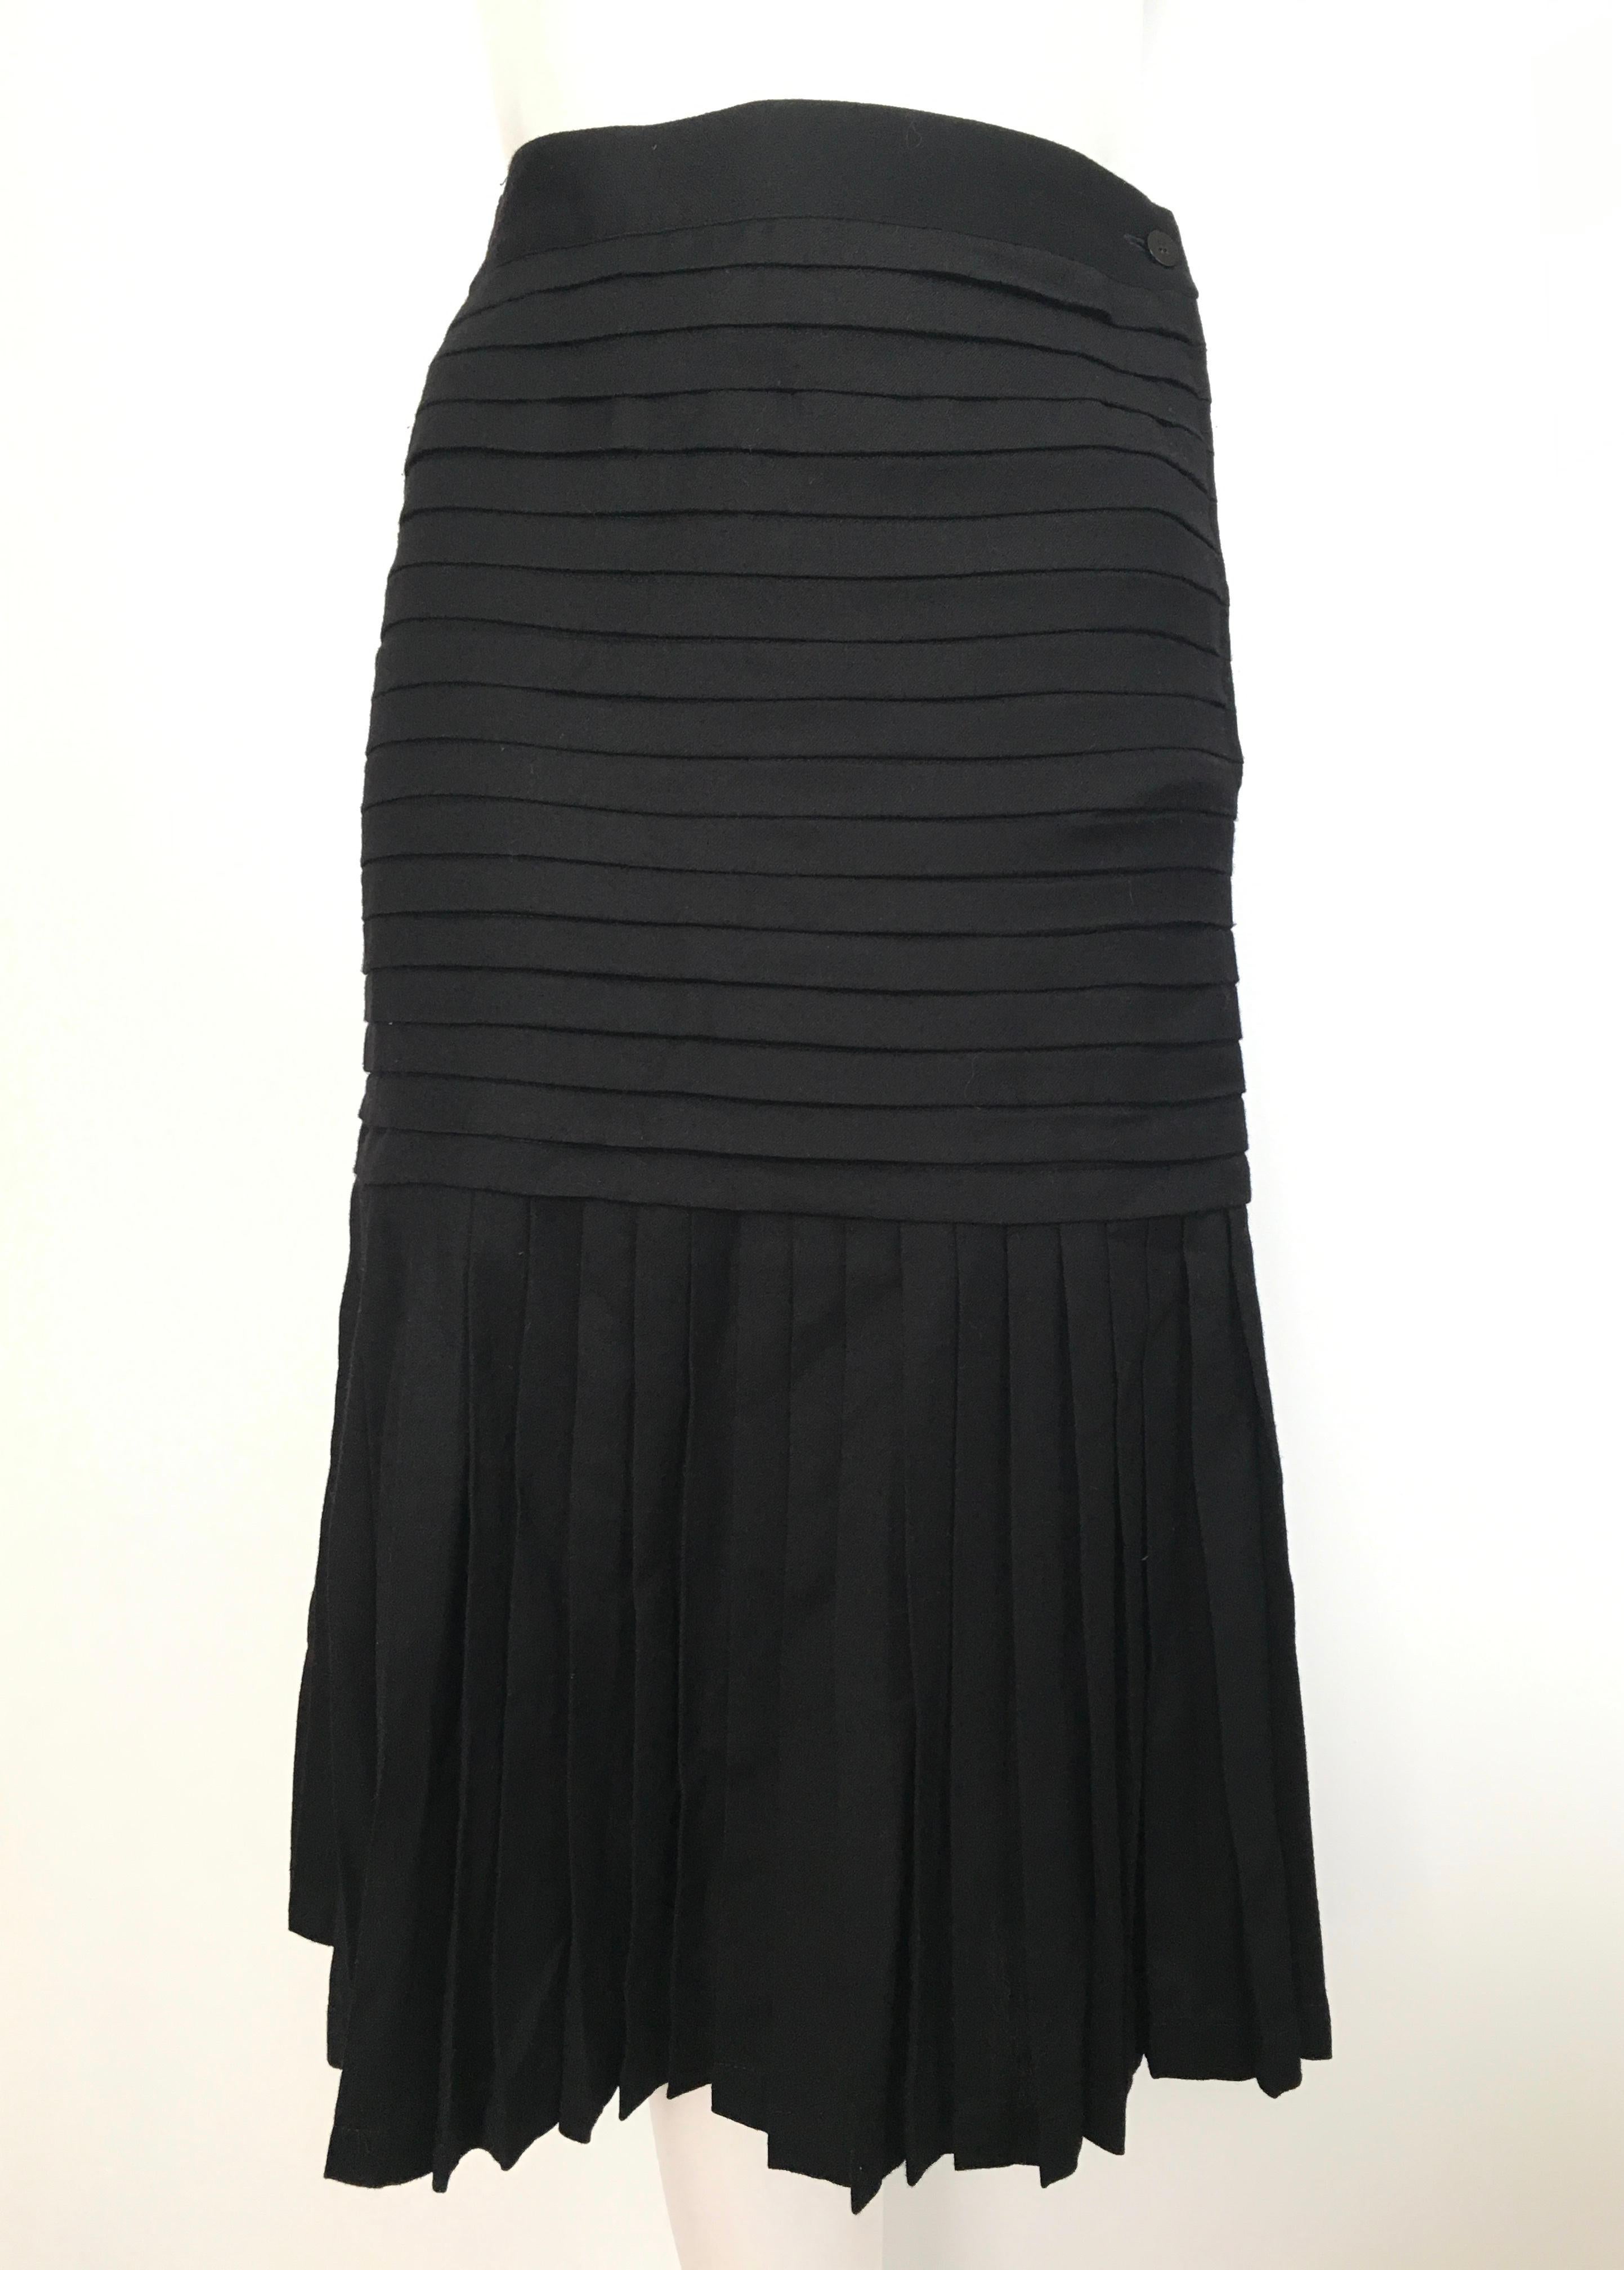 Genny black wool pleated skirt is labeled a size 8 but fits more like a size 6.  The waist is 27